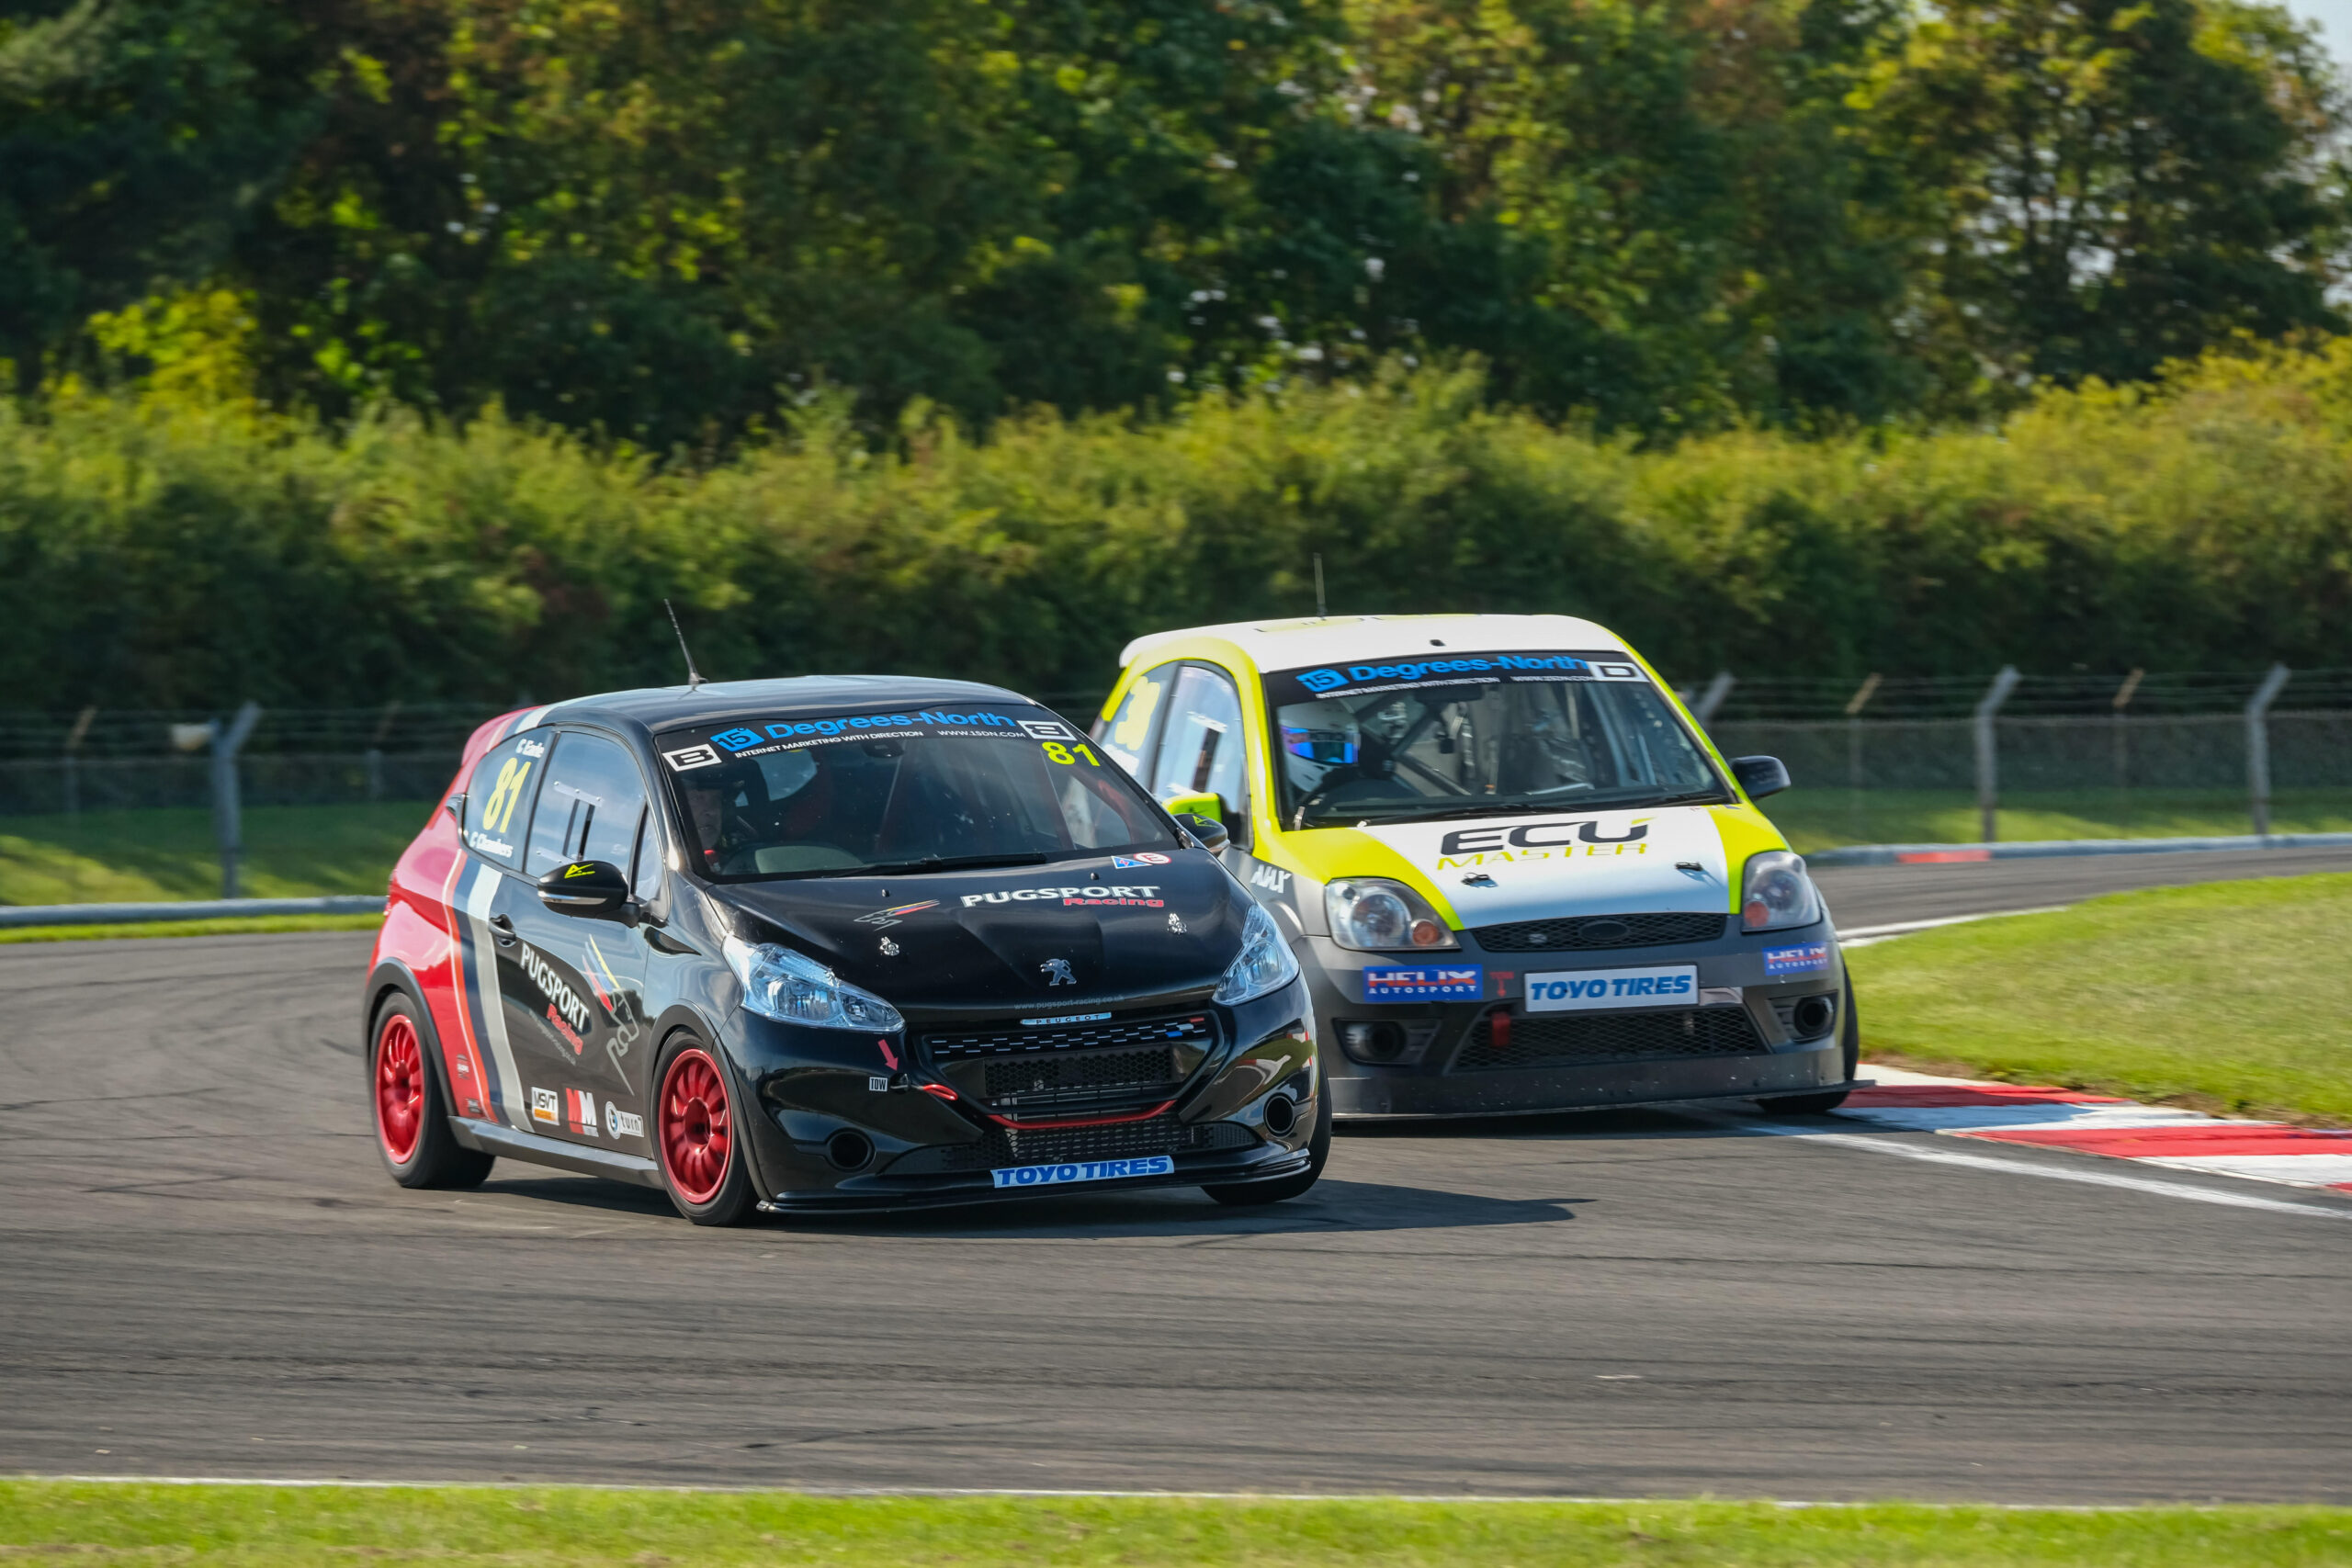 RP-X™-Equipped Type R Trophy Racer Continues Successful Campaign at  Donington Park - EBC Brakes